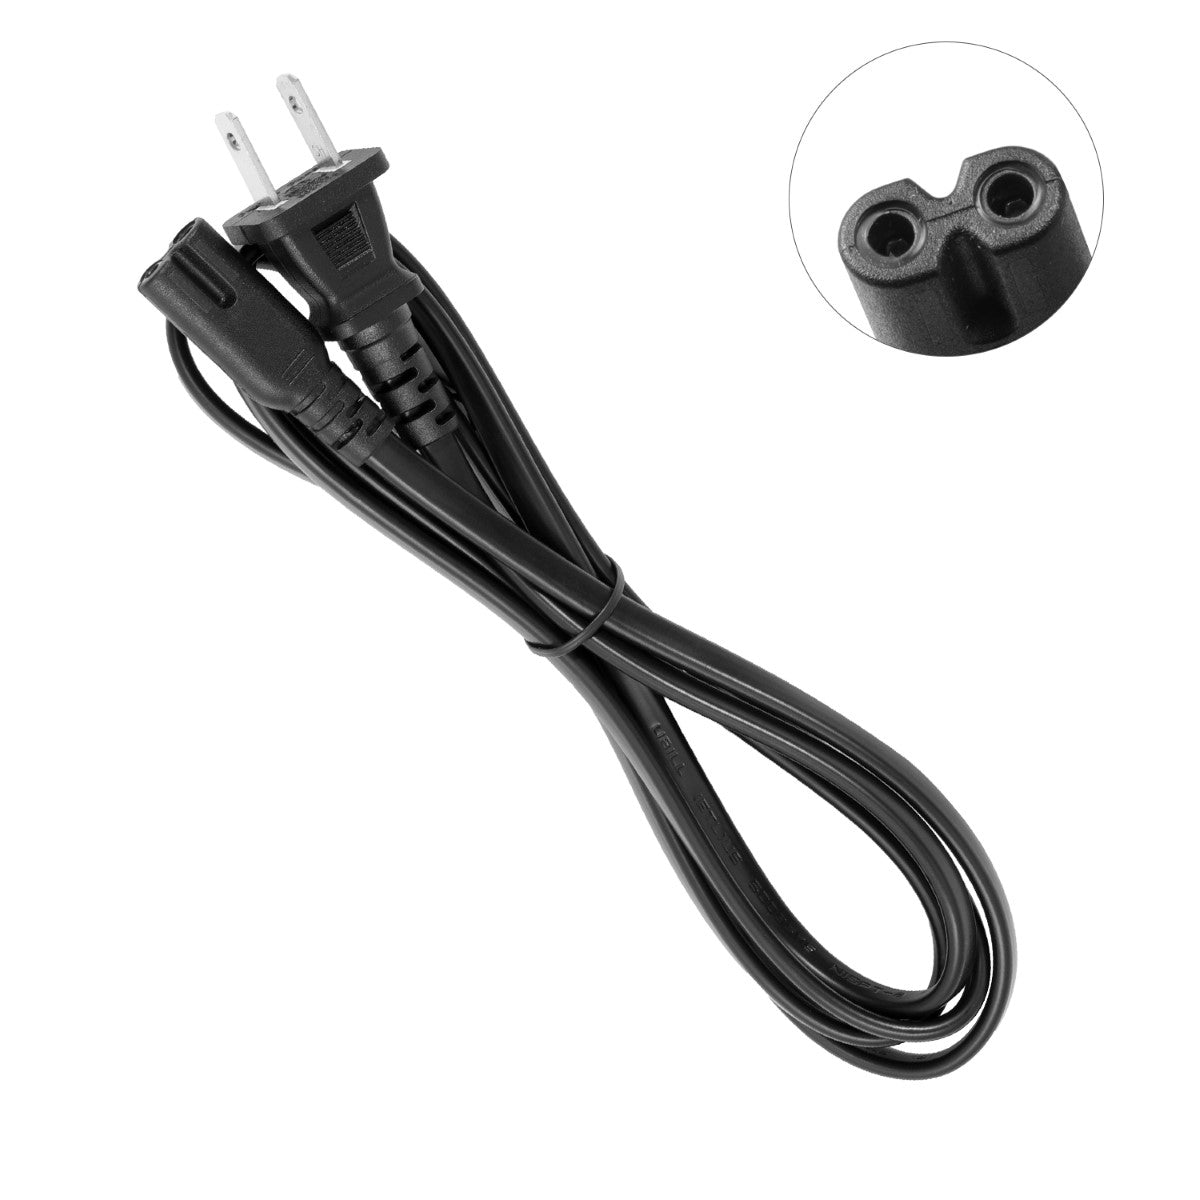 Power Cord for HP ENVY 5643 e-All-in-One Printer.